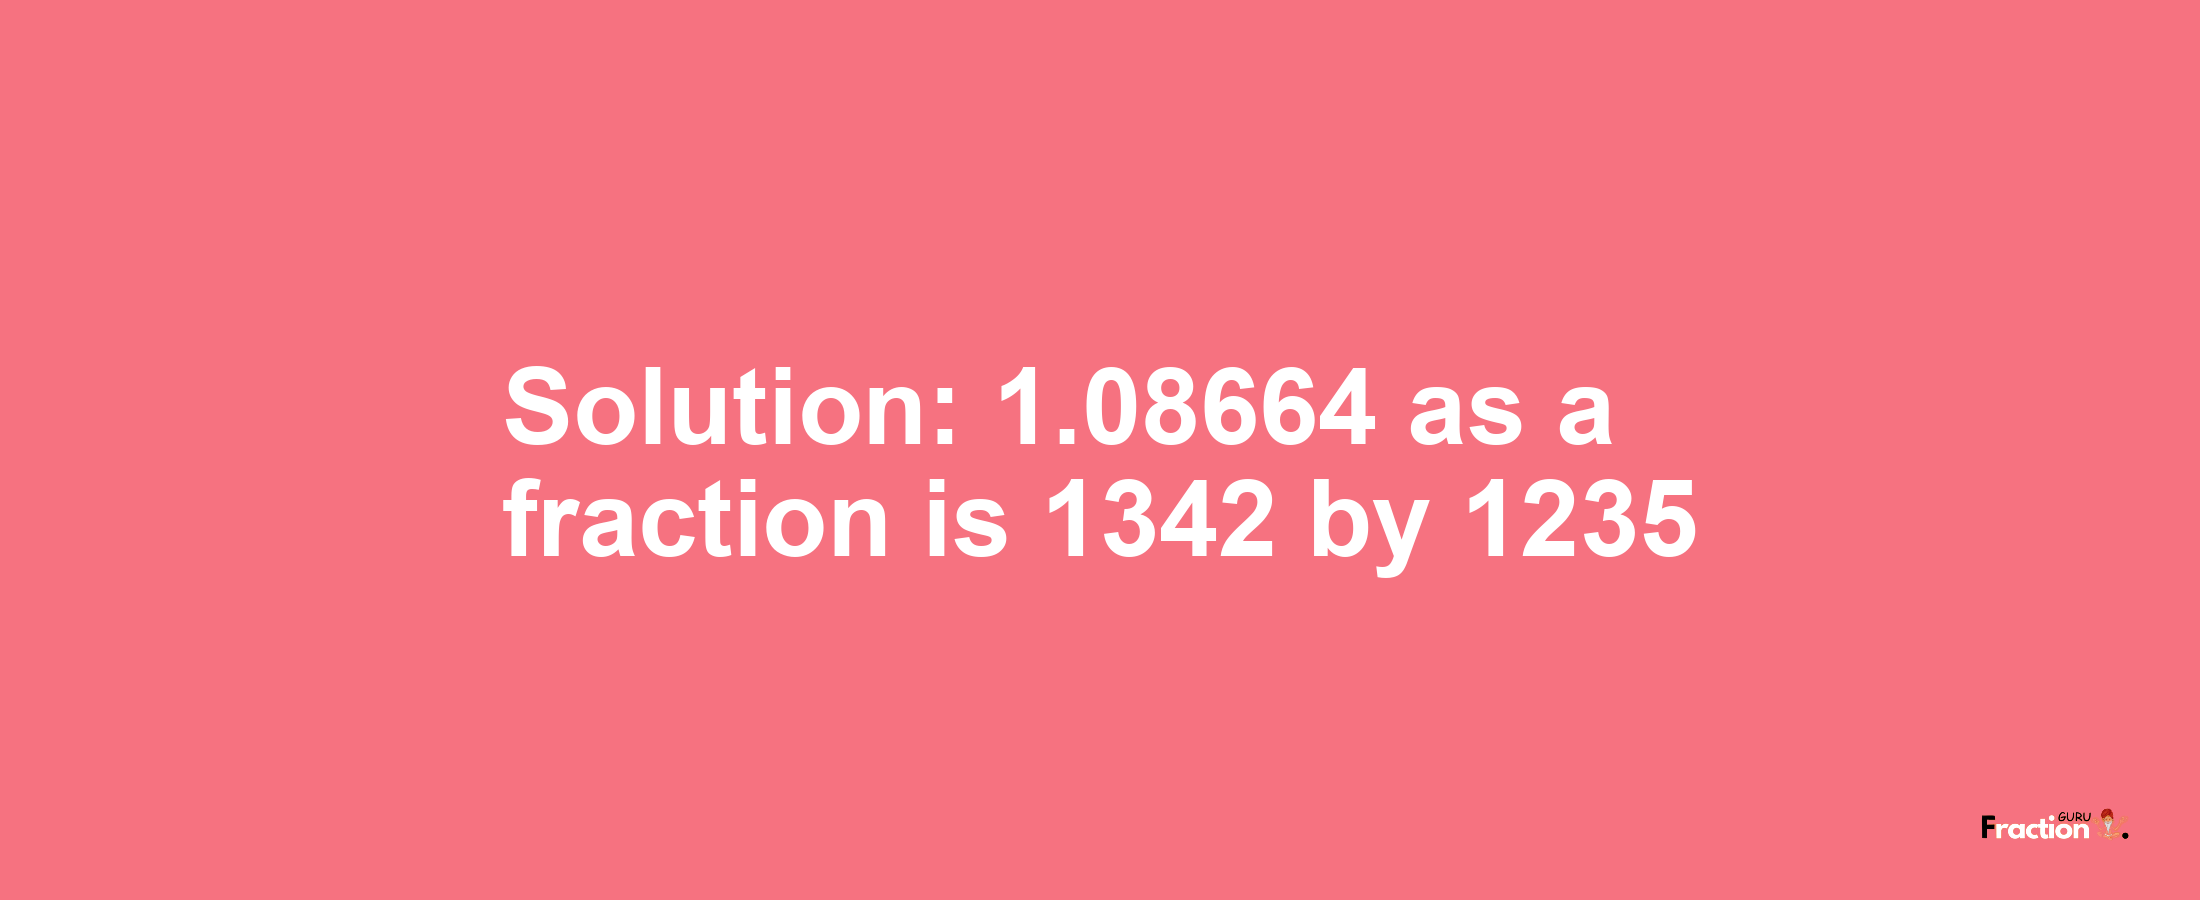 Solution:1.08664 as a fraction is 1342/1235